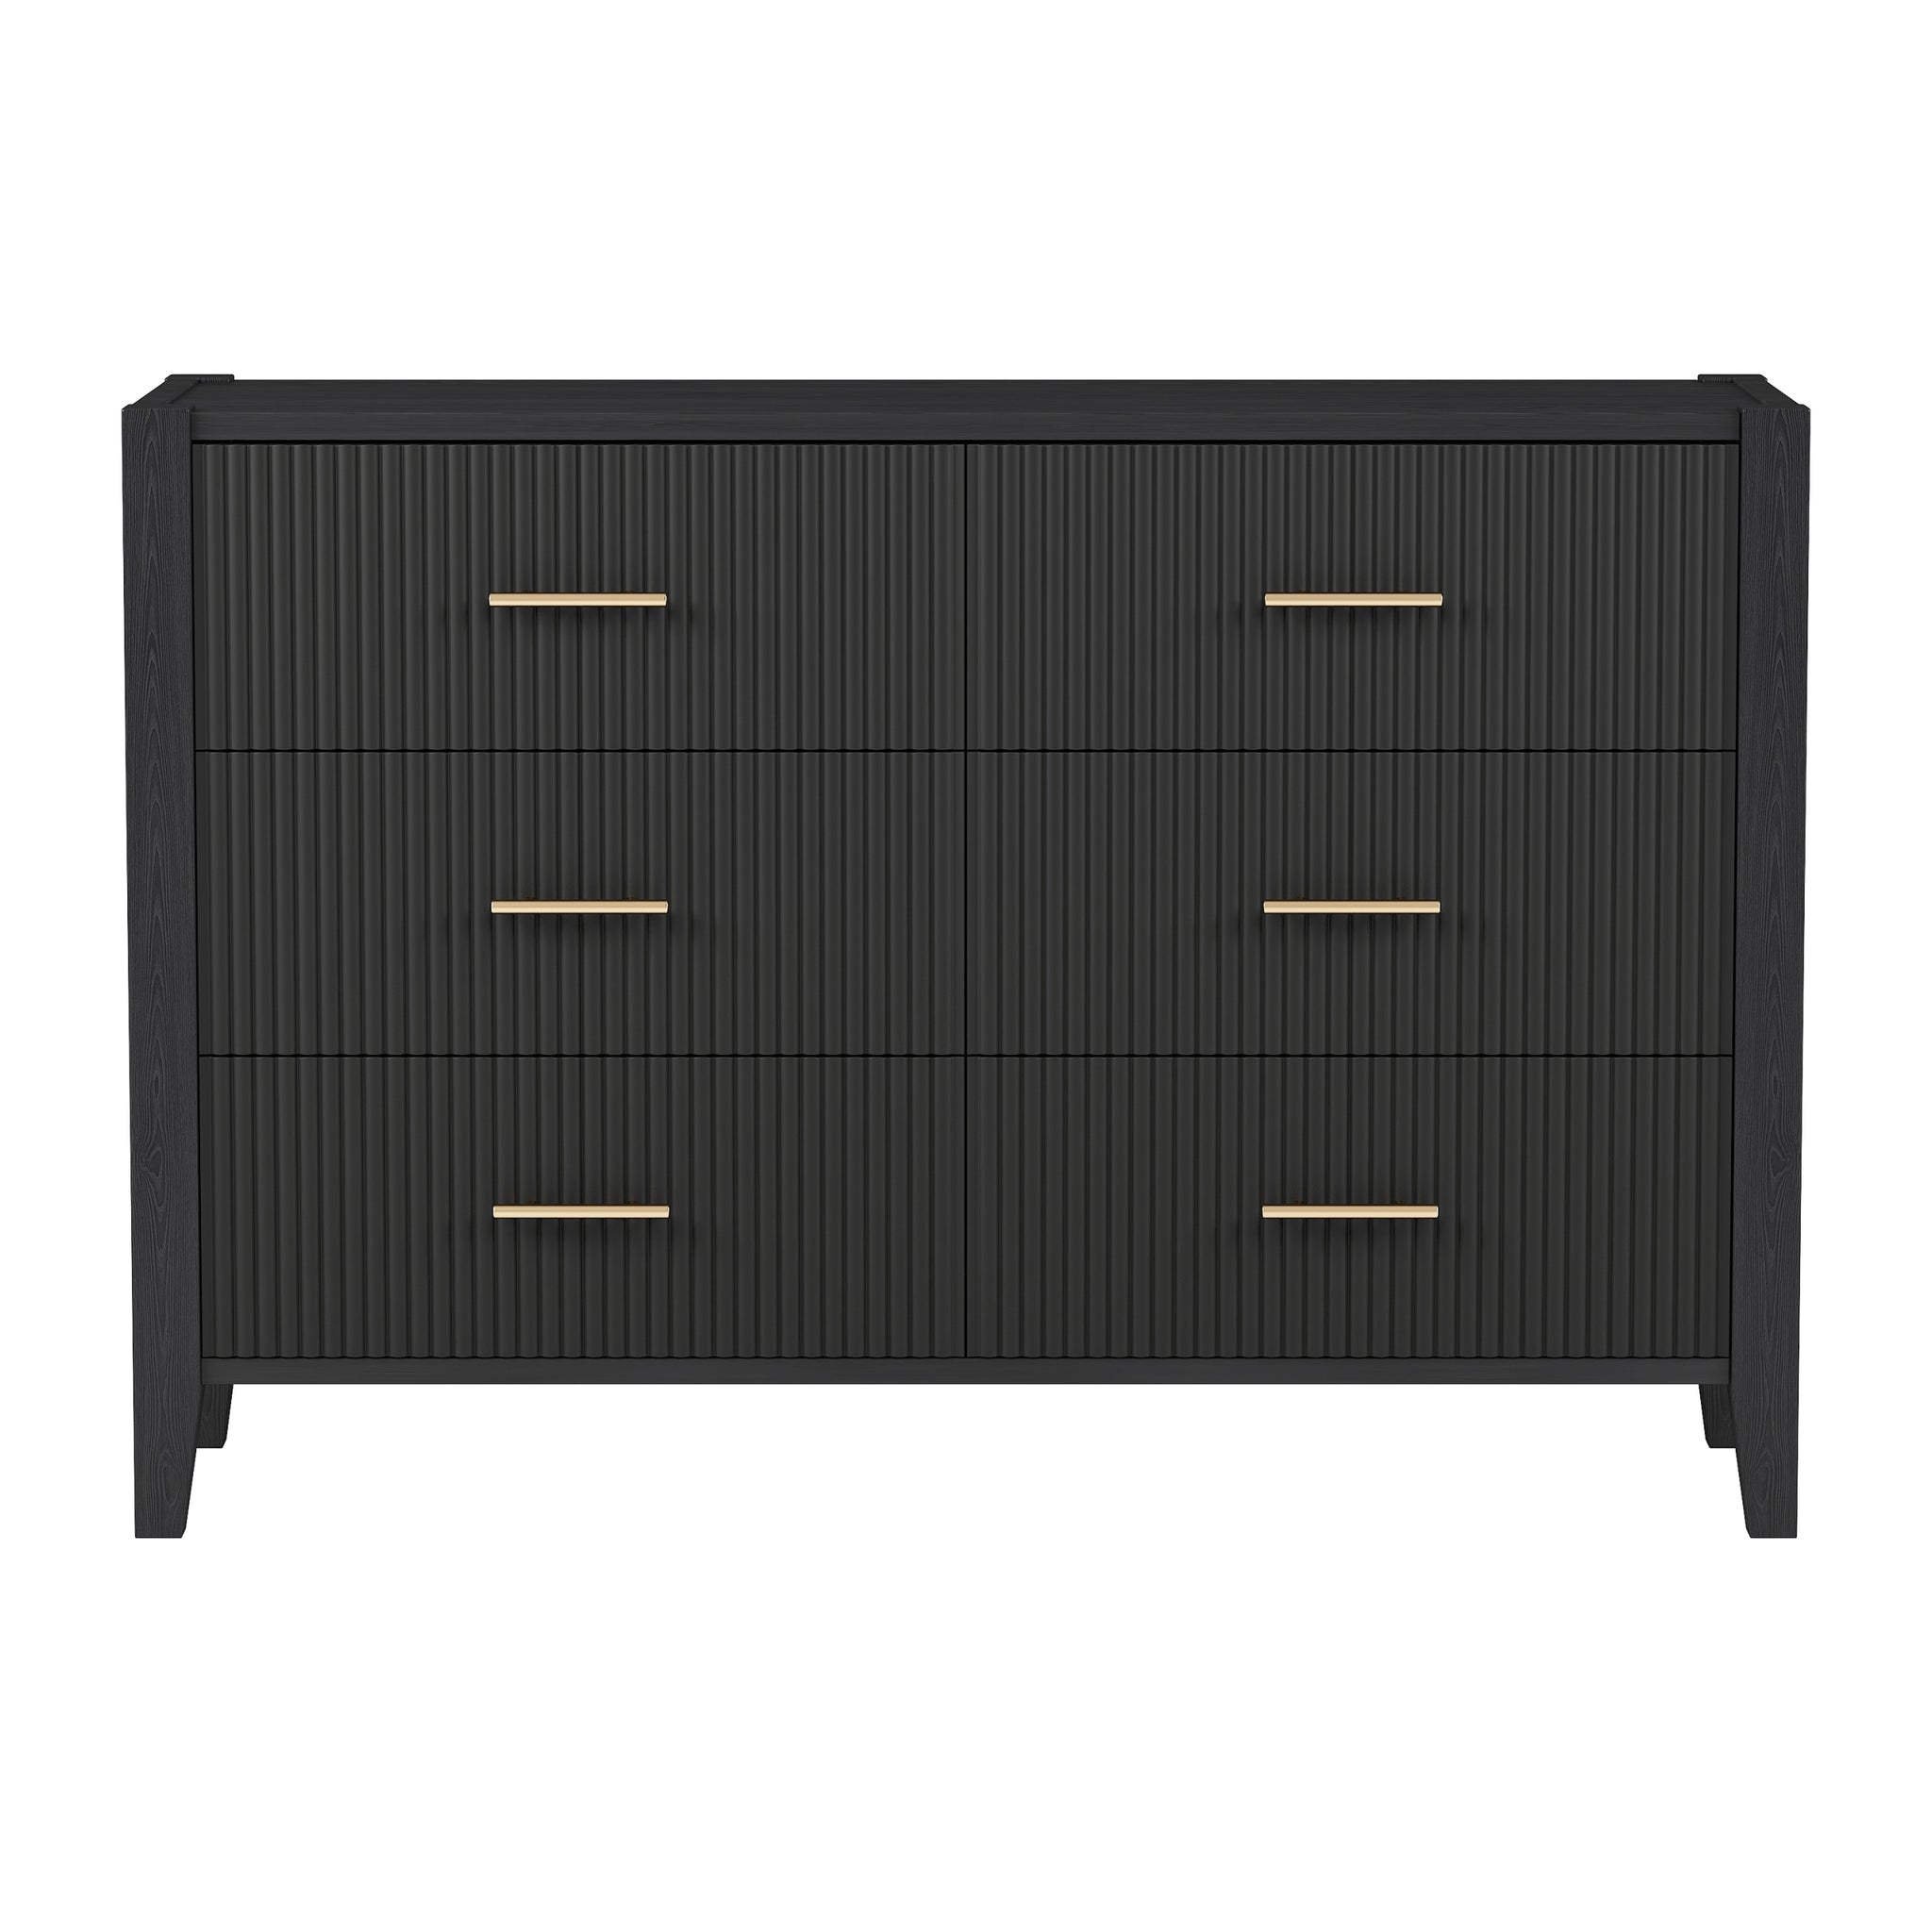 6 Drawer Dresser with Metal Handle for Bedroom black-particle board